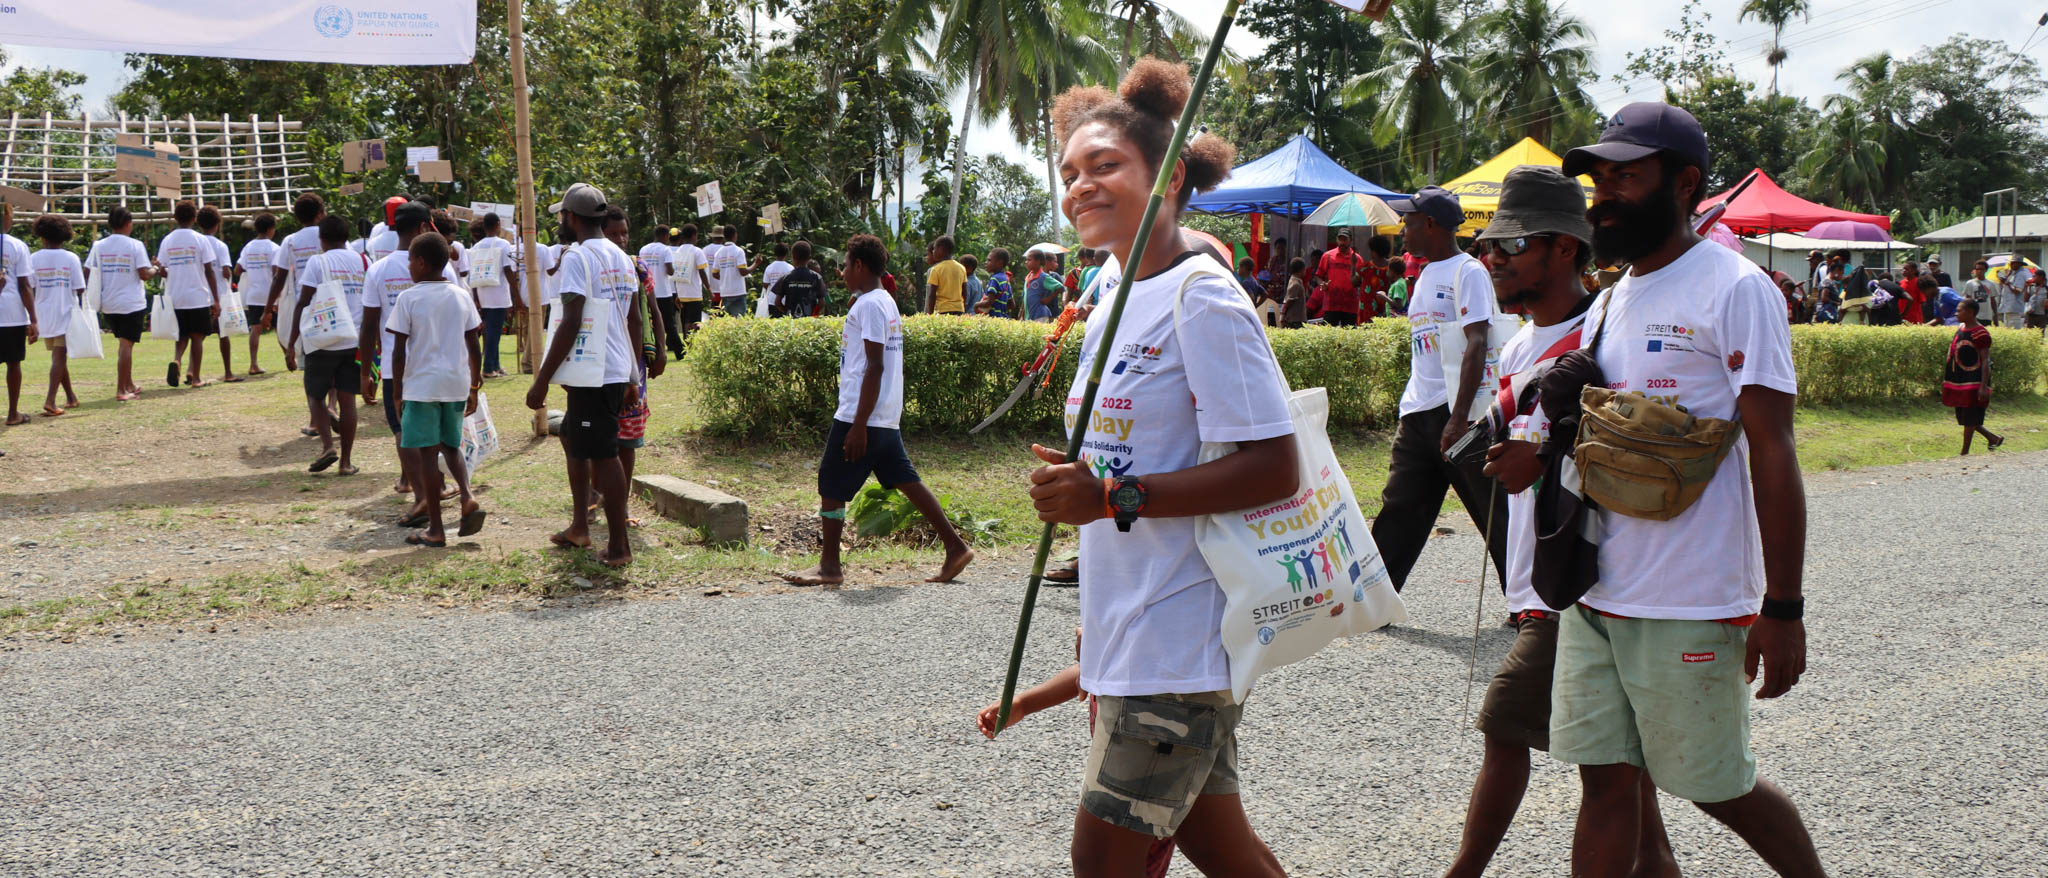 International Youth Day 2022 commemorated by the FAO-led EU Funded UN Joint STREIT Programme in Papua New Guinea